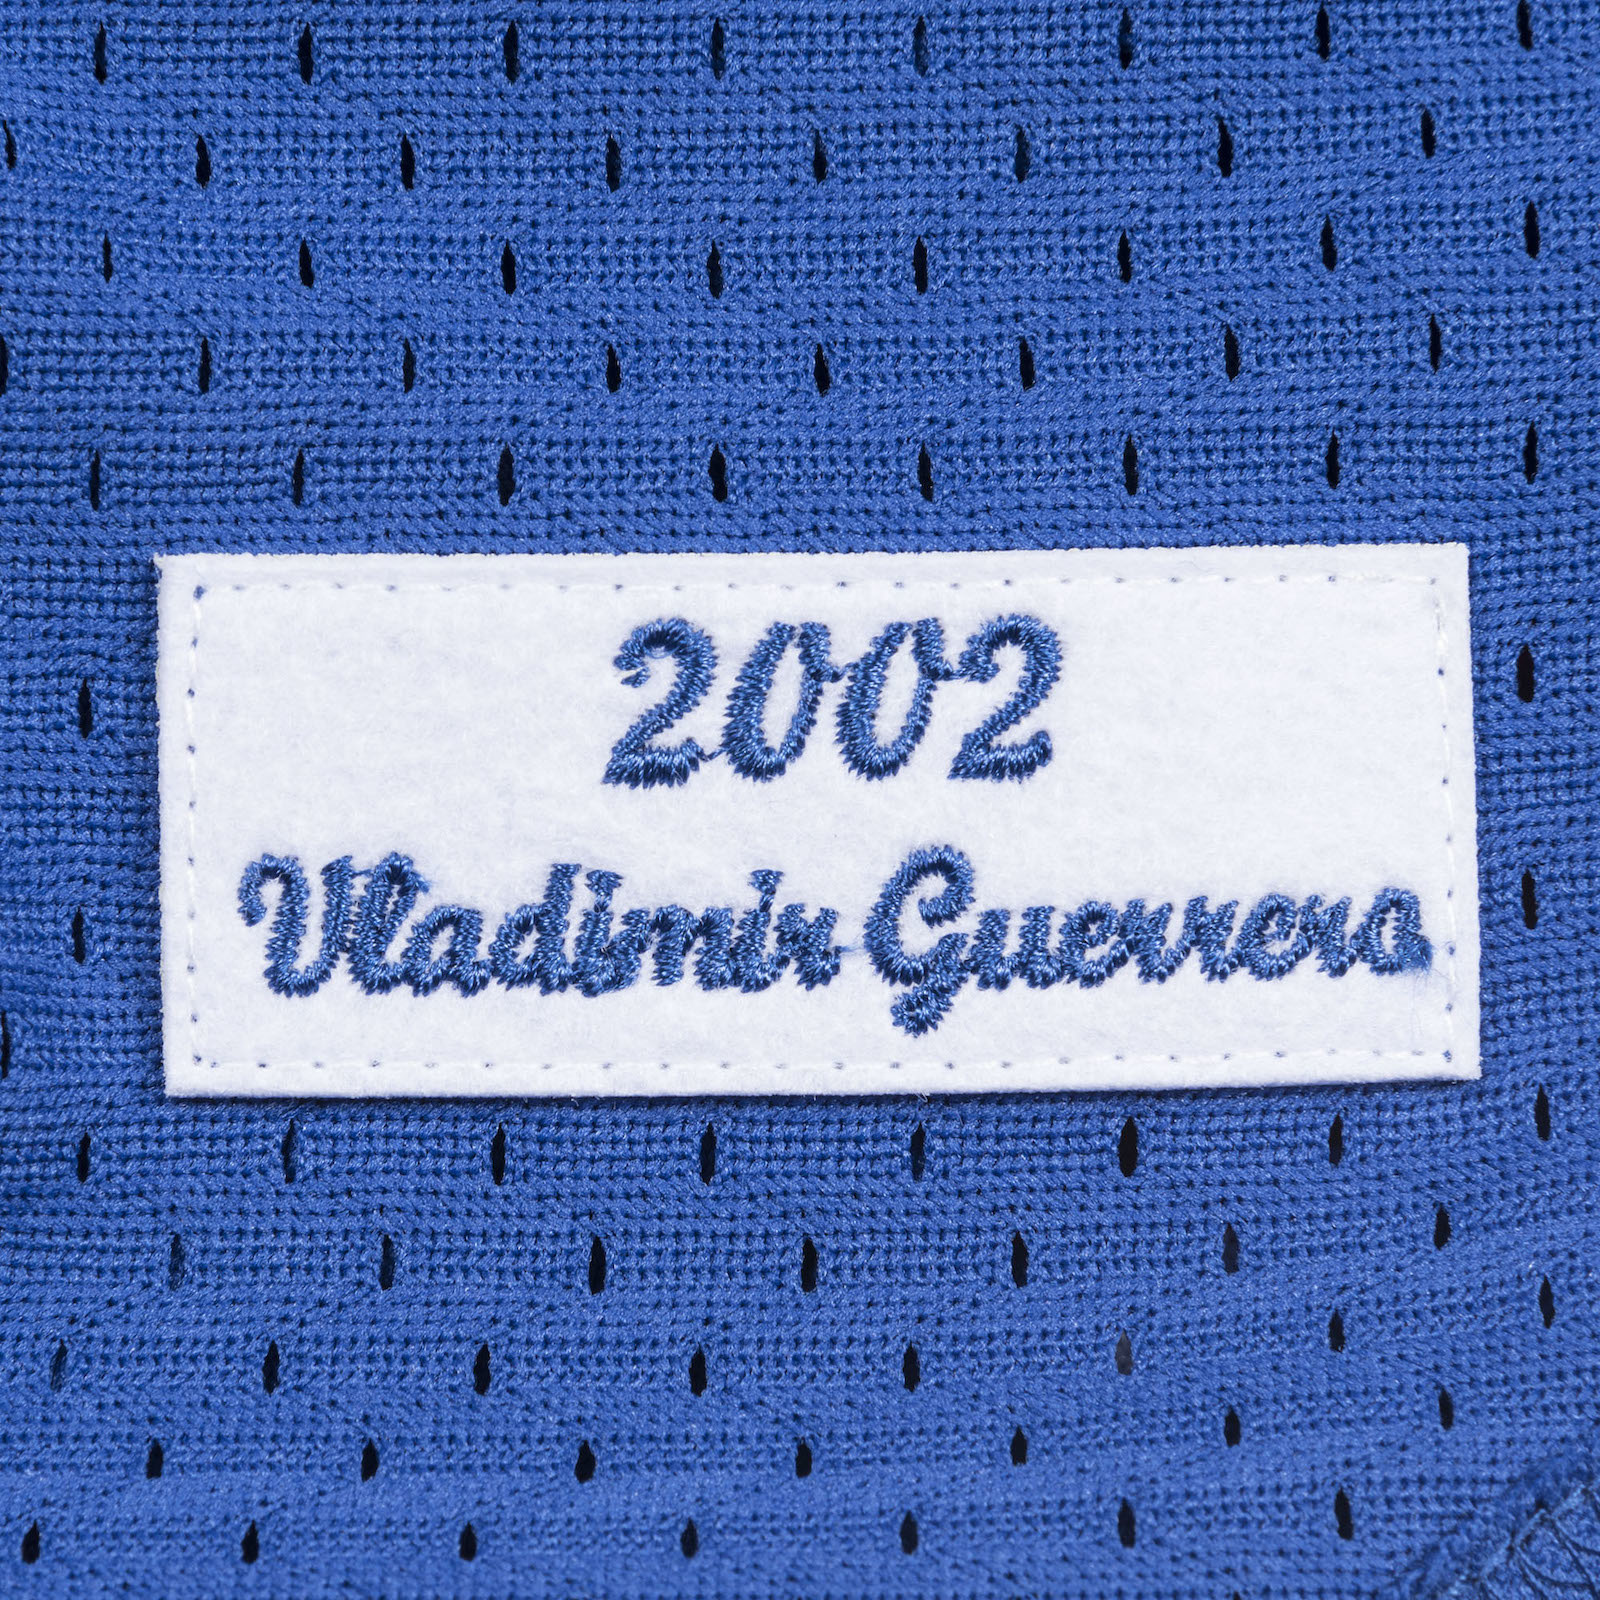 Lot Detail - 2002 Vladimir Guerrero Montreal Expos Game-Used Home Jersey